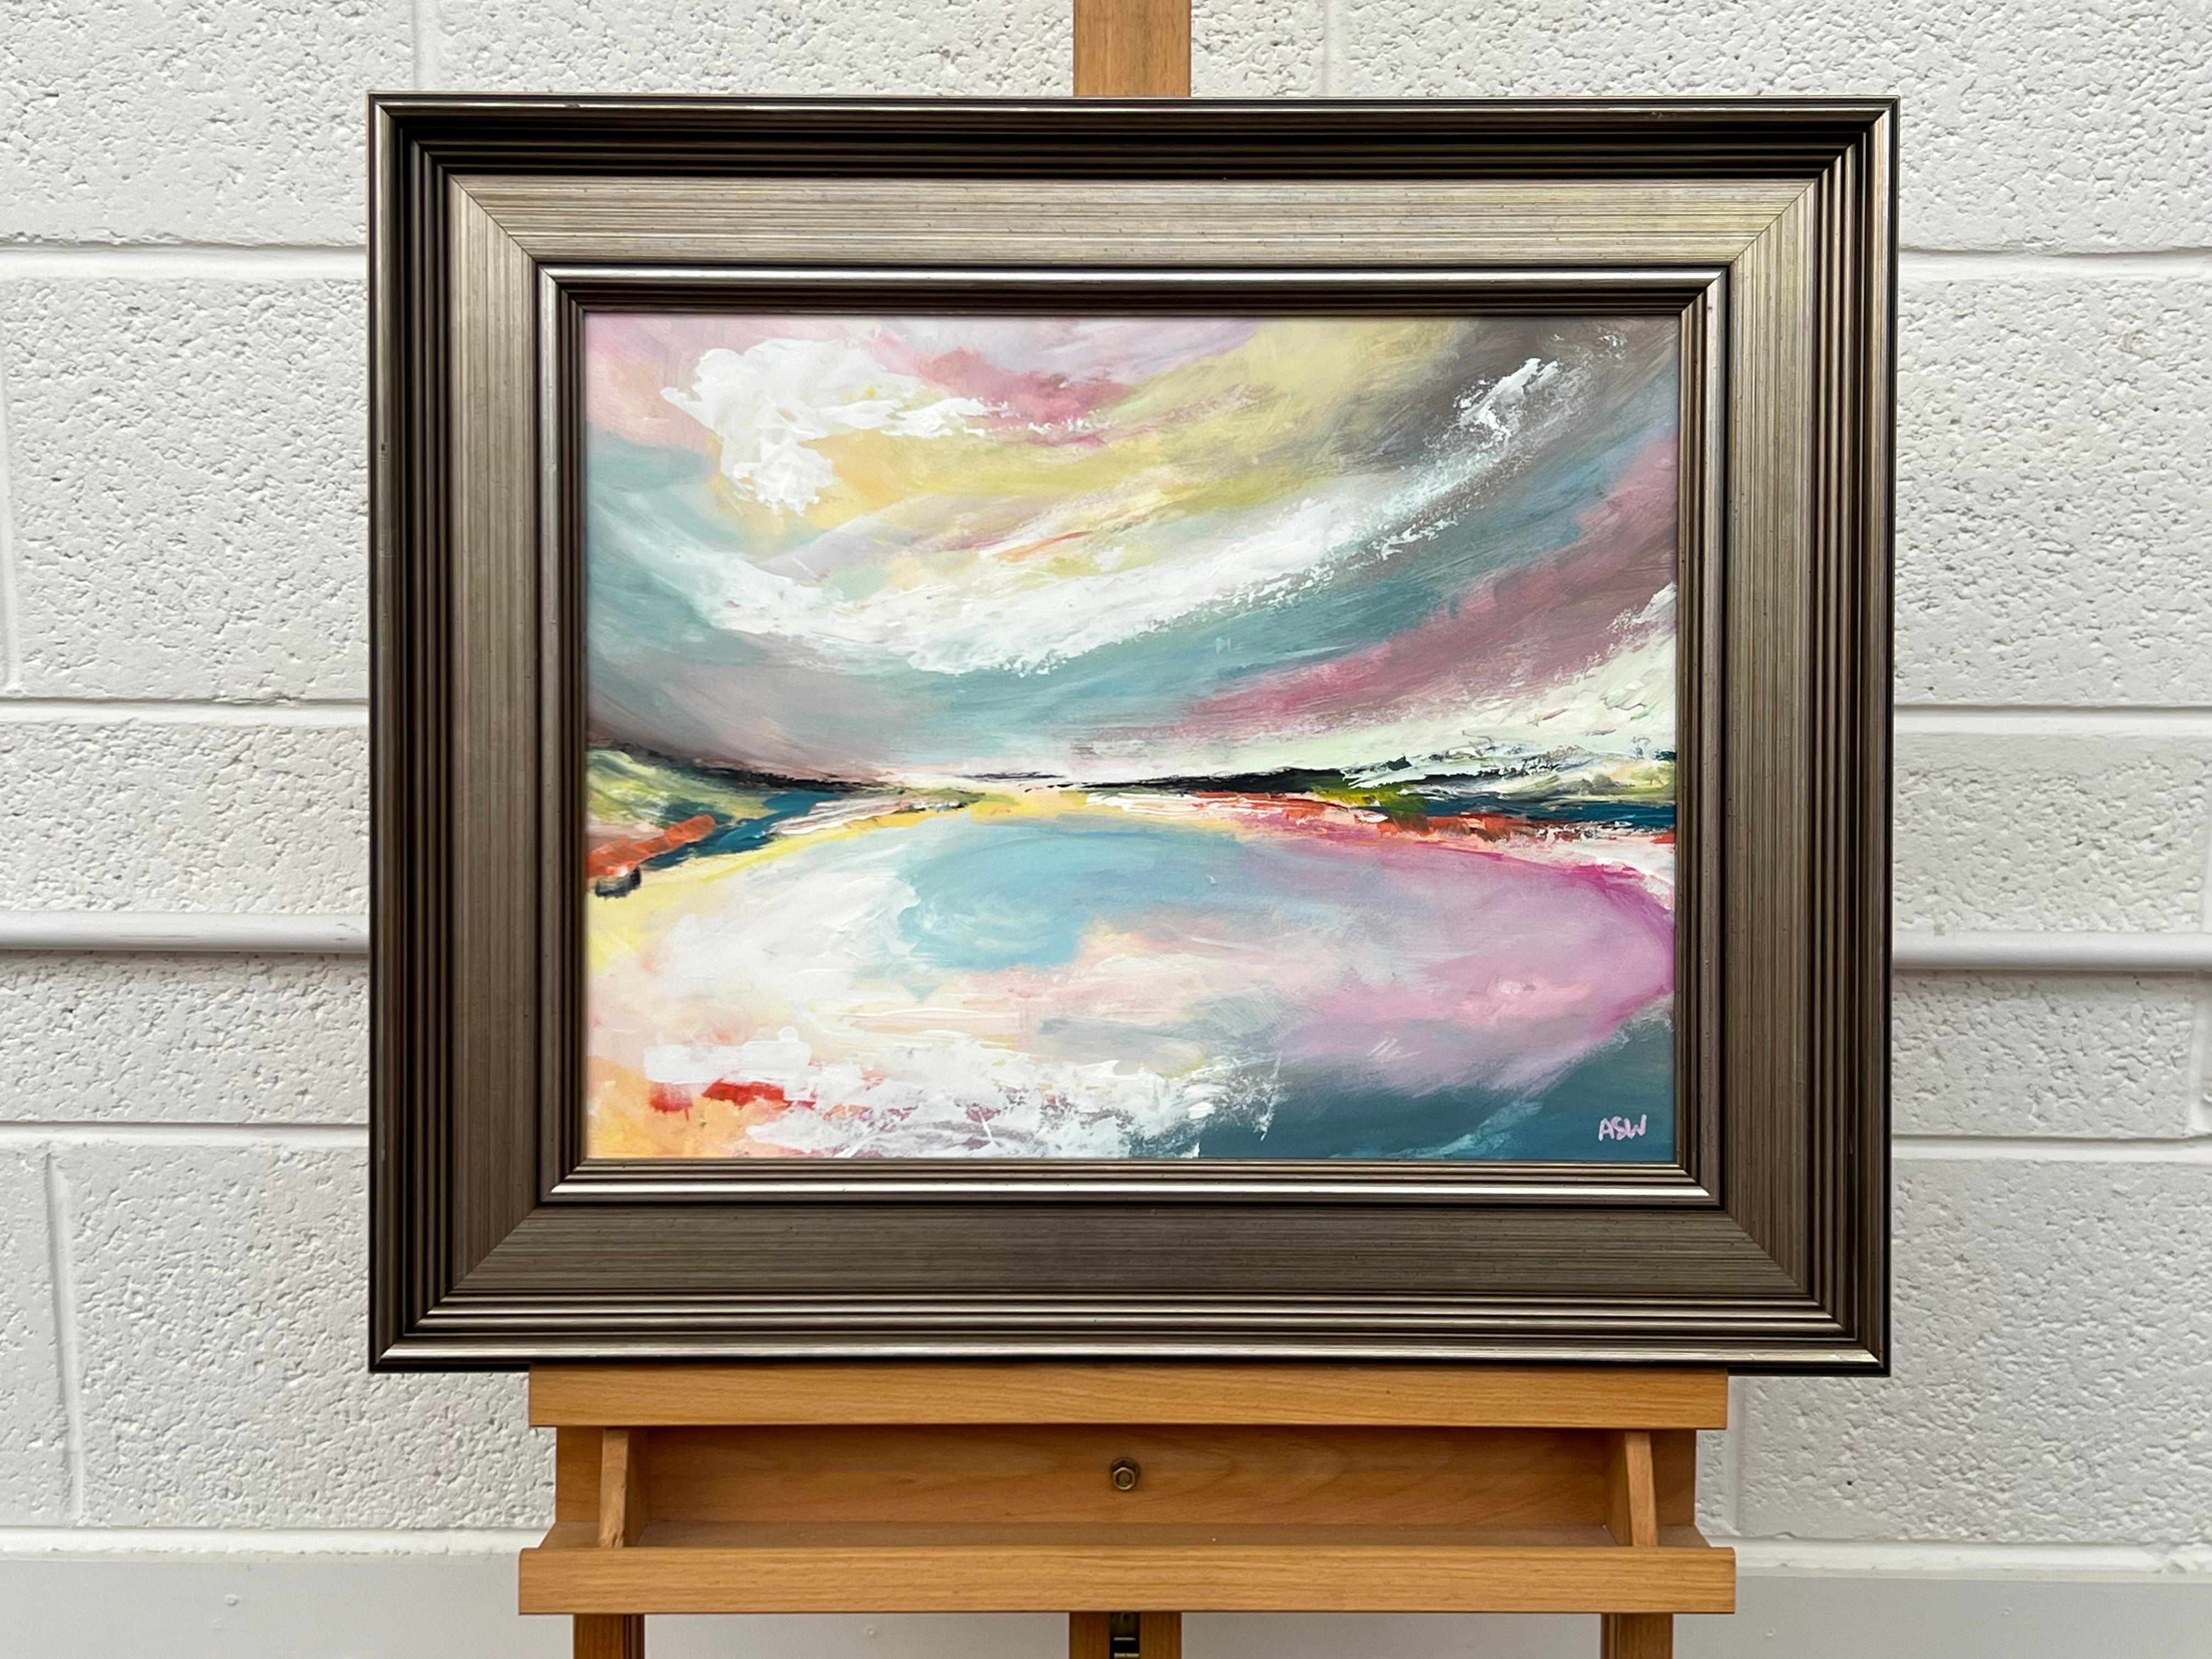 Abstract Landscape Seascape Art with Pink Blue & White Sky by British Artist For Sale 16